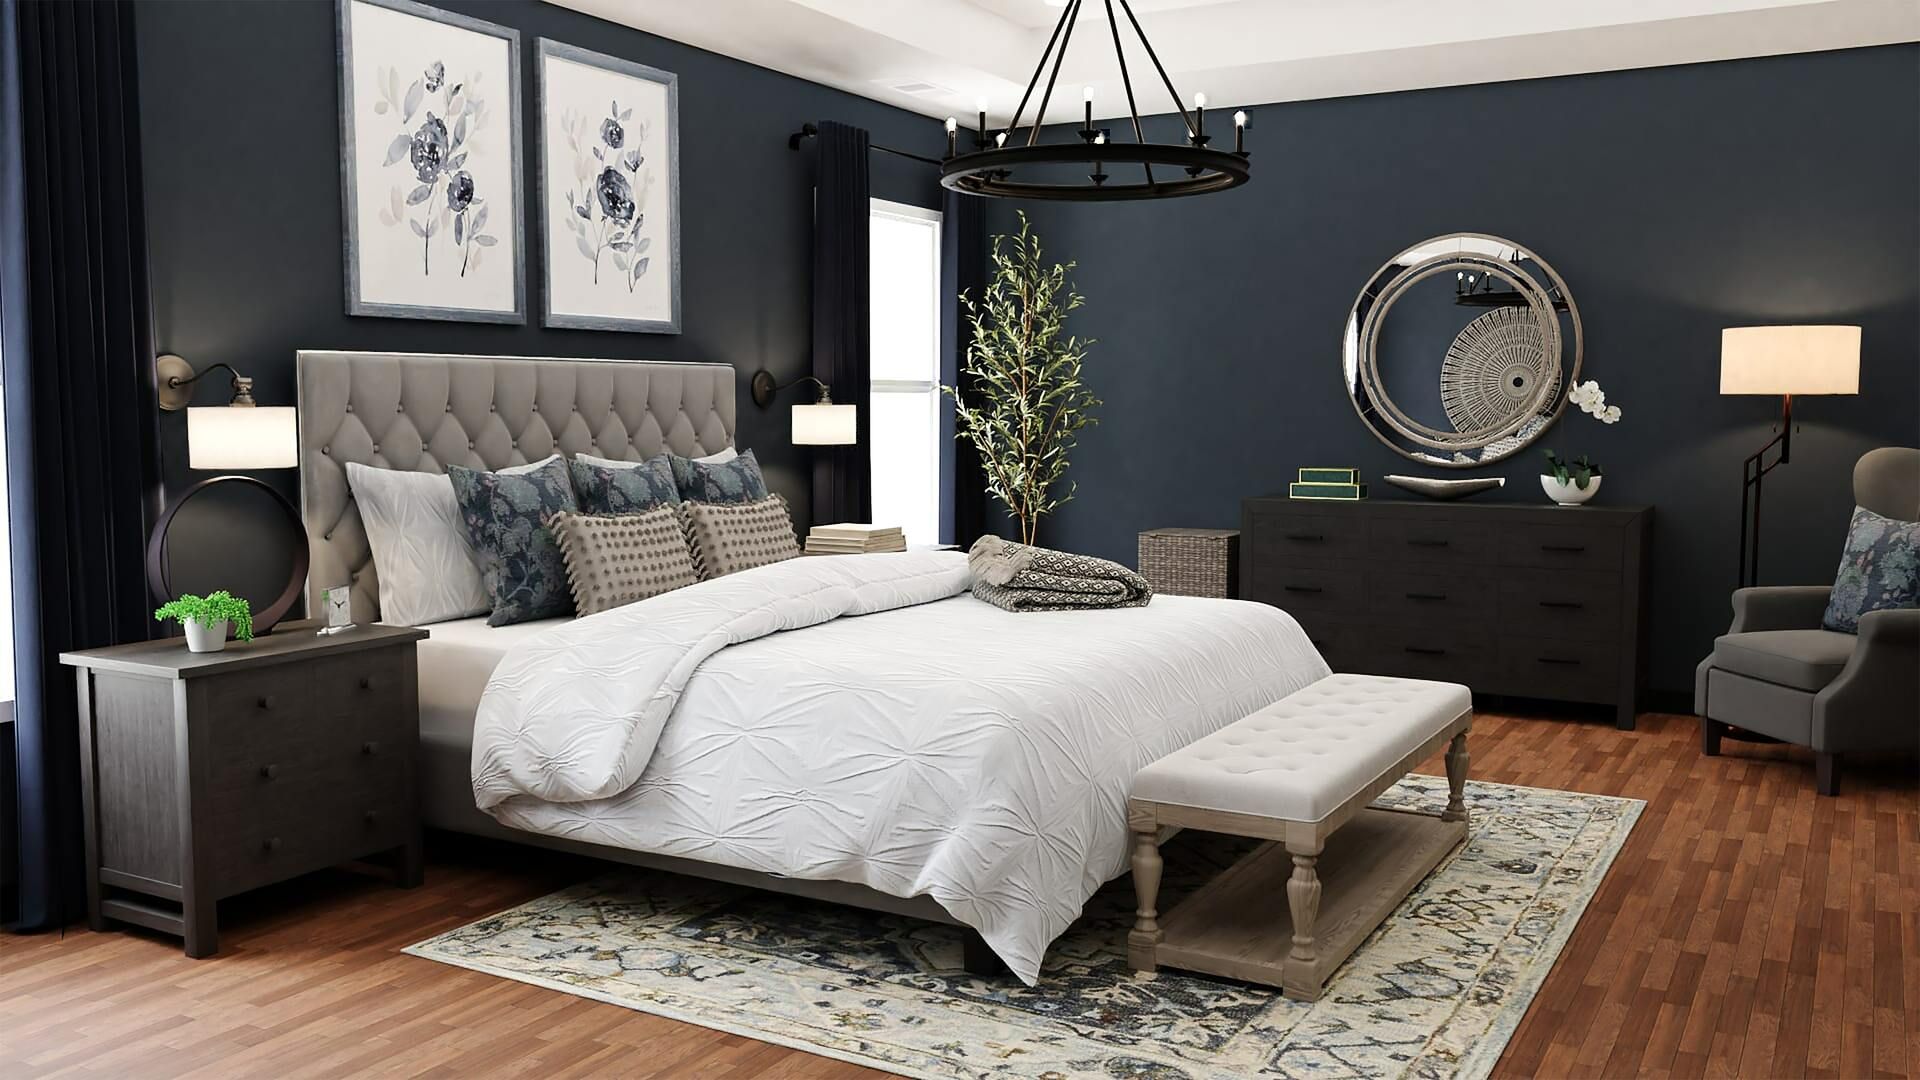 Bedroom lighting tips to make your bedroom feel extra cosy Press profile homify Dormitorio principal Furniture, Building, Property, Decoration, Comfort, Wood, Interior design, Textile, Lighting, Bed frame